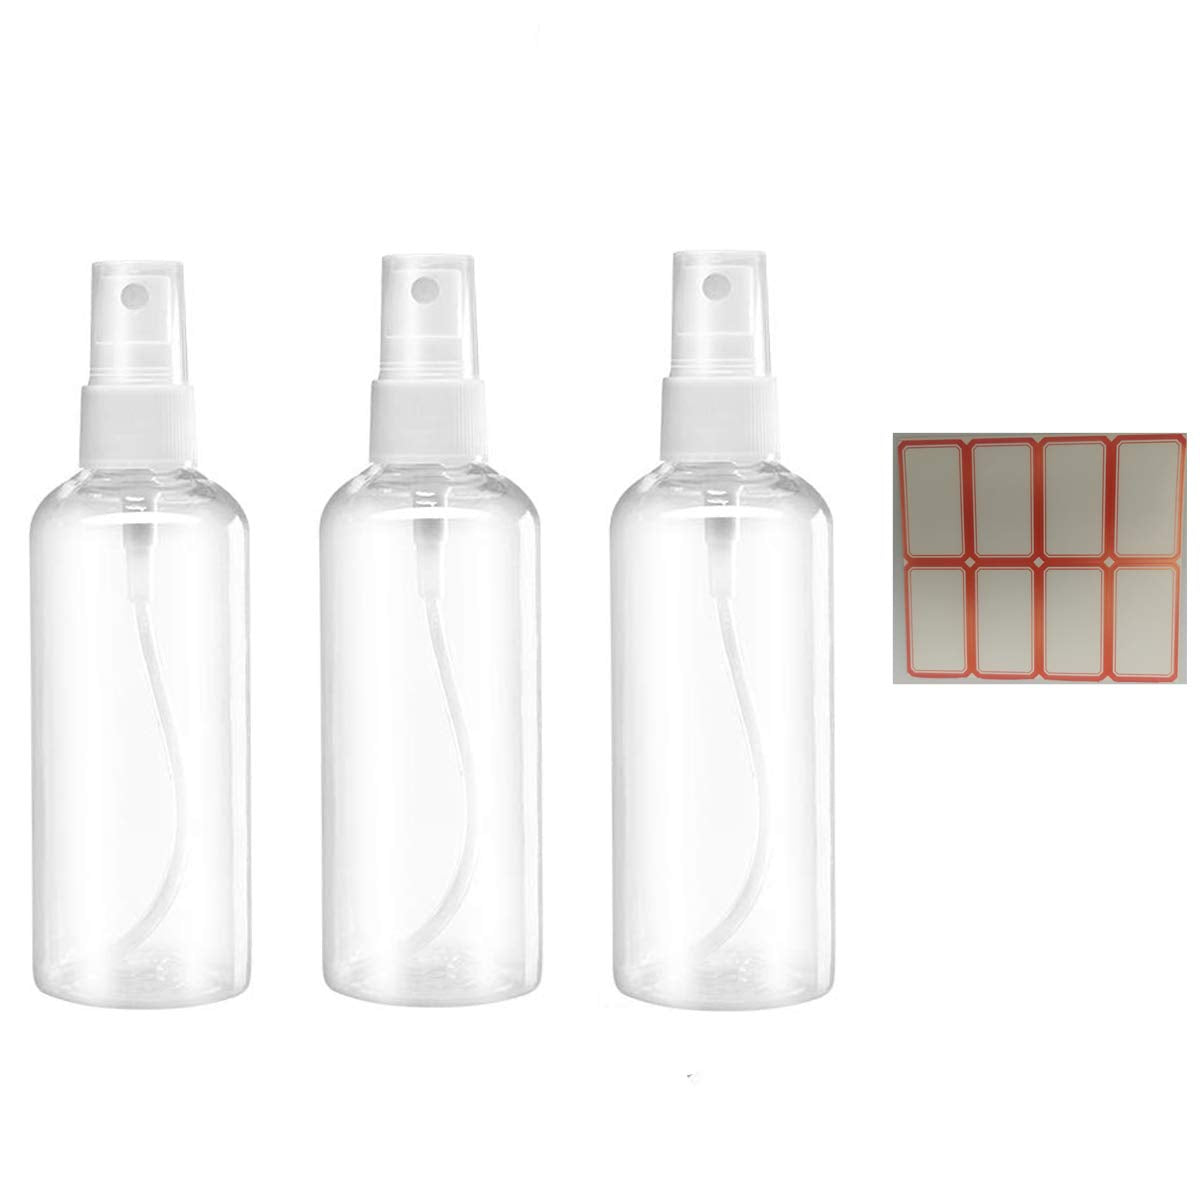 Spray Bottles, 1.69oz/50ml 3.38oz/100ml Clear Empty Fine Mist Plastic Mini Travel Bottle Set, Small Refillable Containers with Labels (3pcs 50ml)